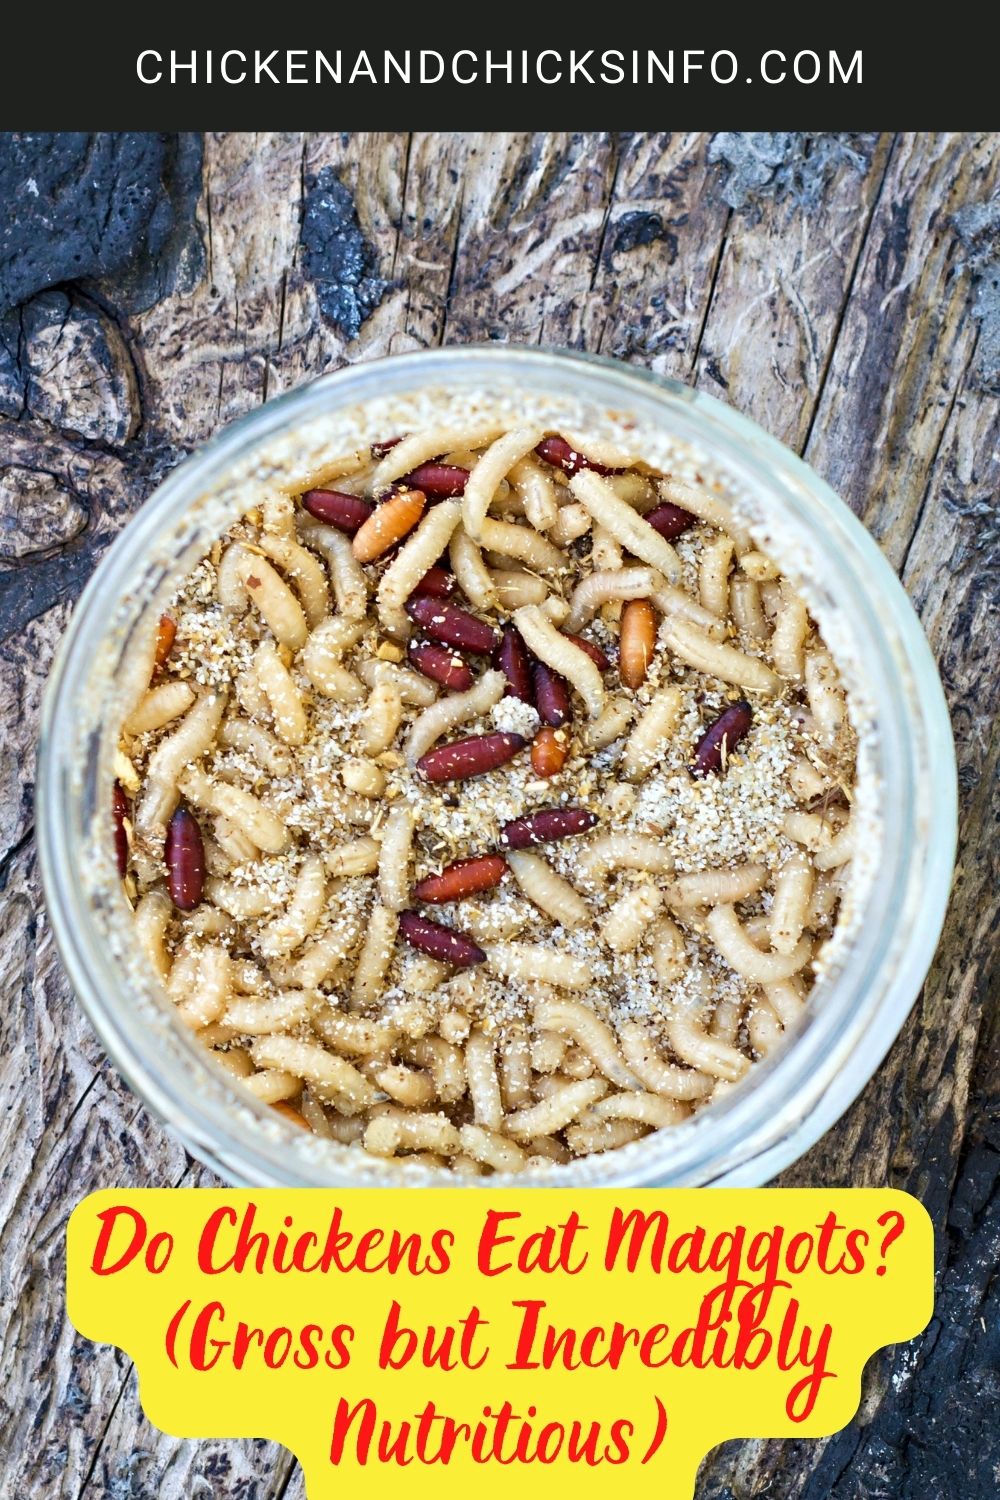 Do Chickens Eat Maggots? (Gross but Incredibly Nutritious) poster.
